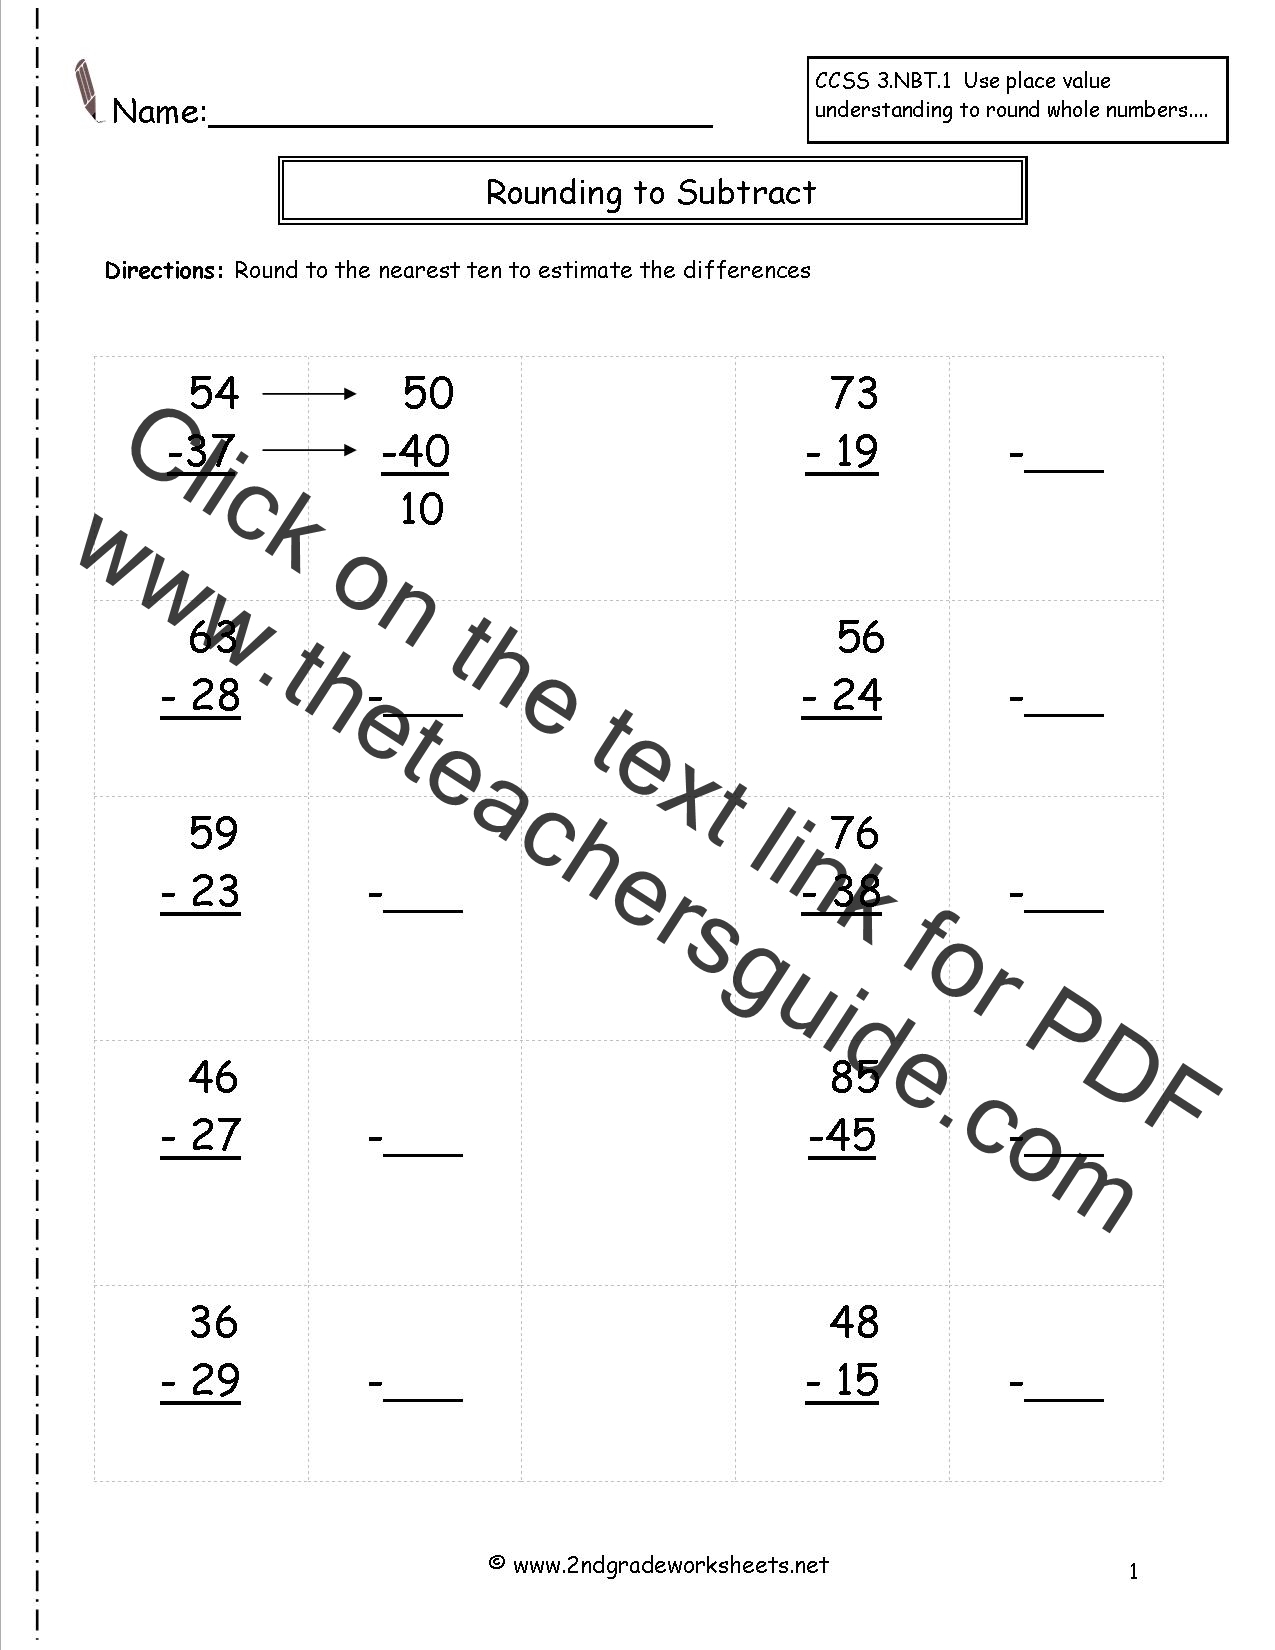 rounding-whole-numbers-worksheets